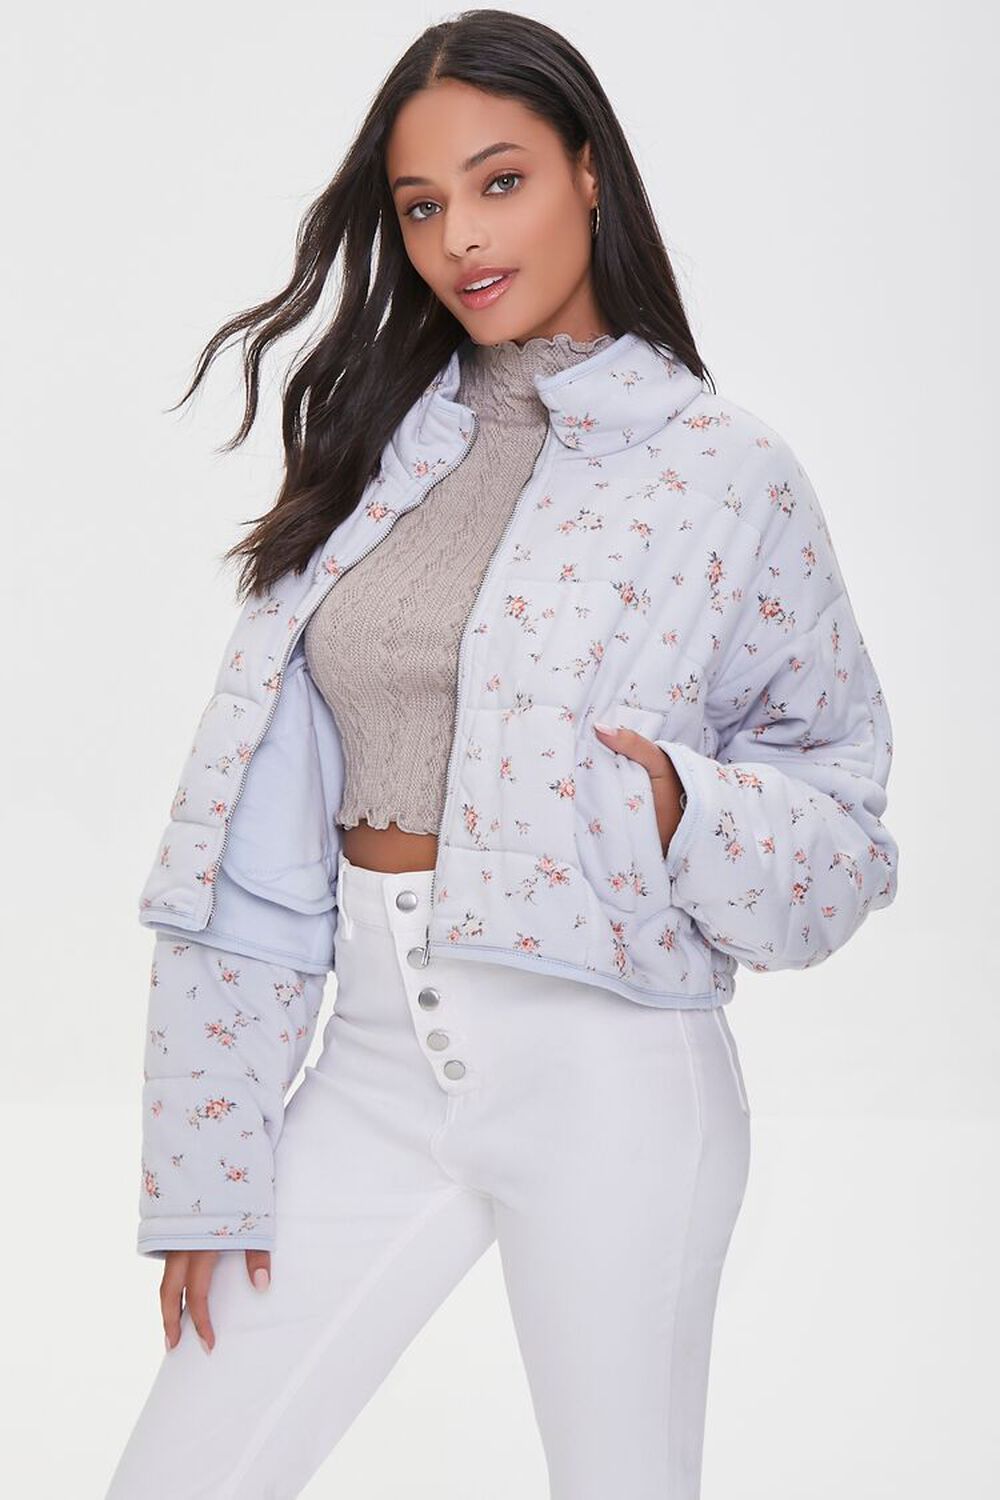 LIGHT BLUE/MULTI Floral Print Zip-Up Quilted Jacket, image 1